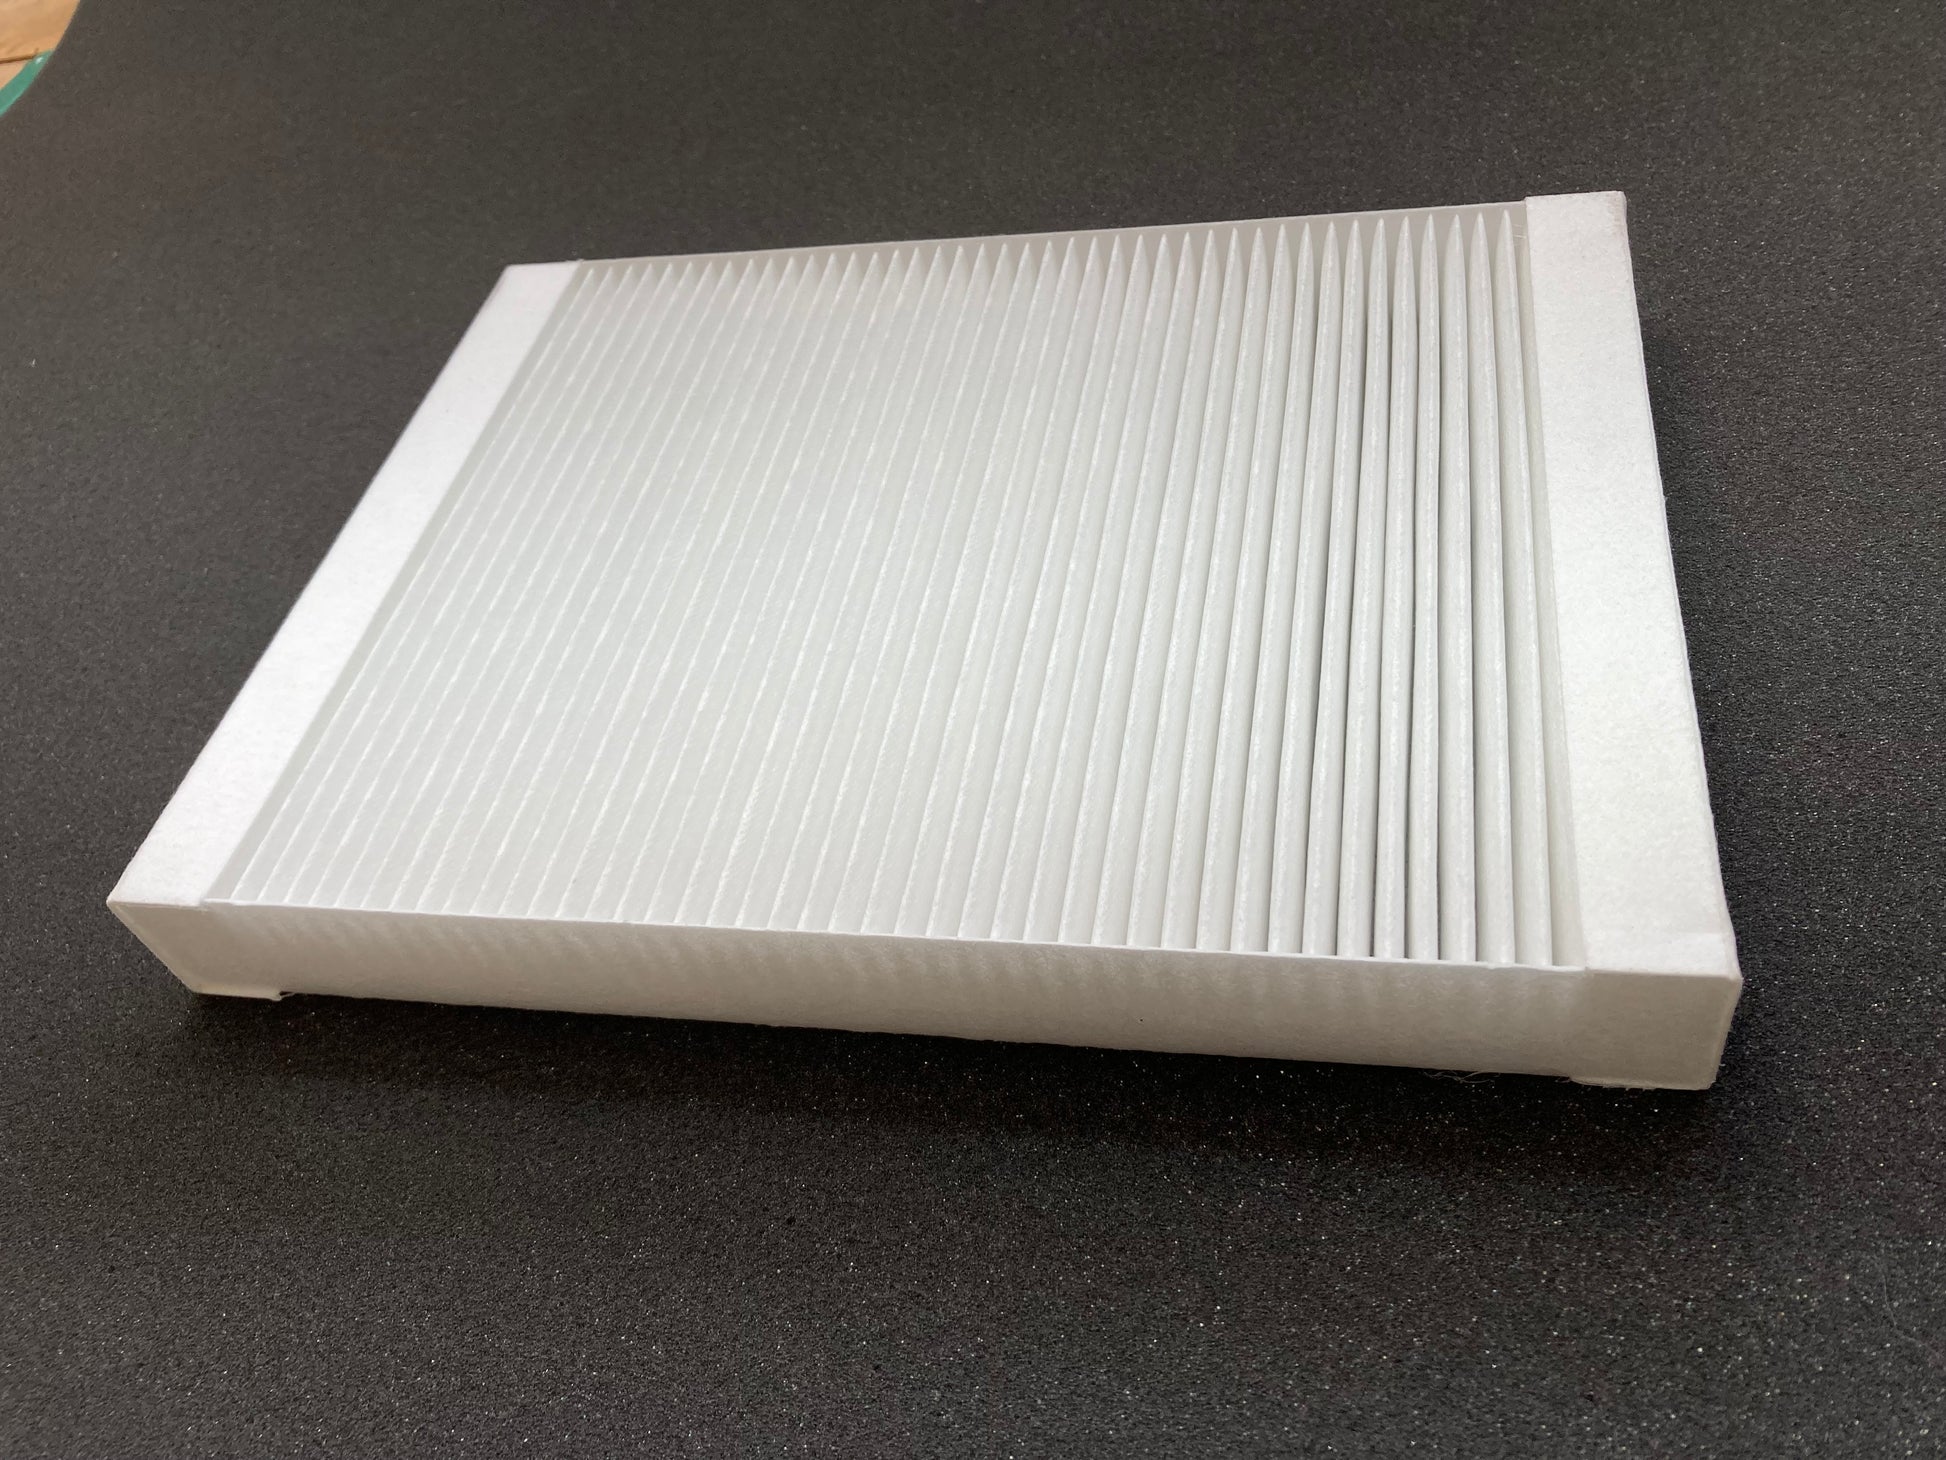 This filter is for the  Genvex Eco 360R models . Filter size is 185*250*16mm. This is an excellent machine and all parts if needed are available from ourselves.